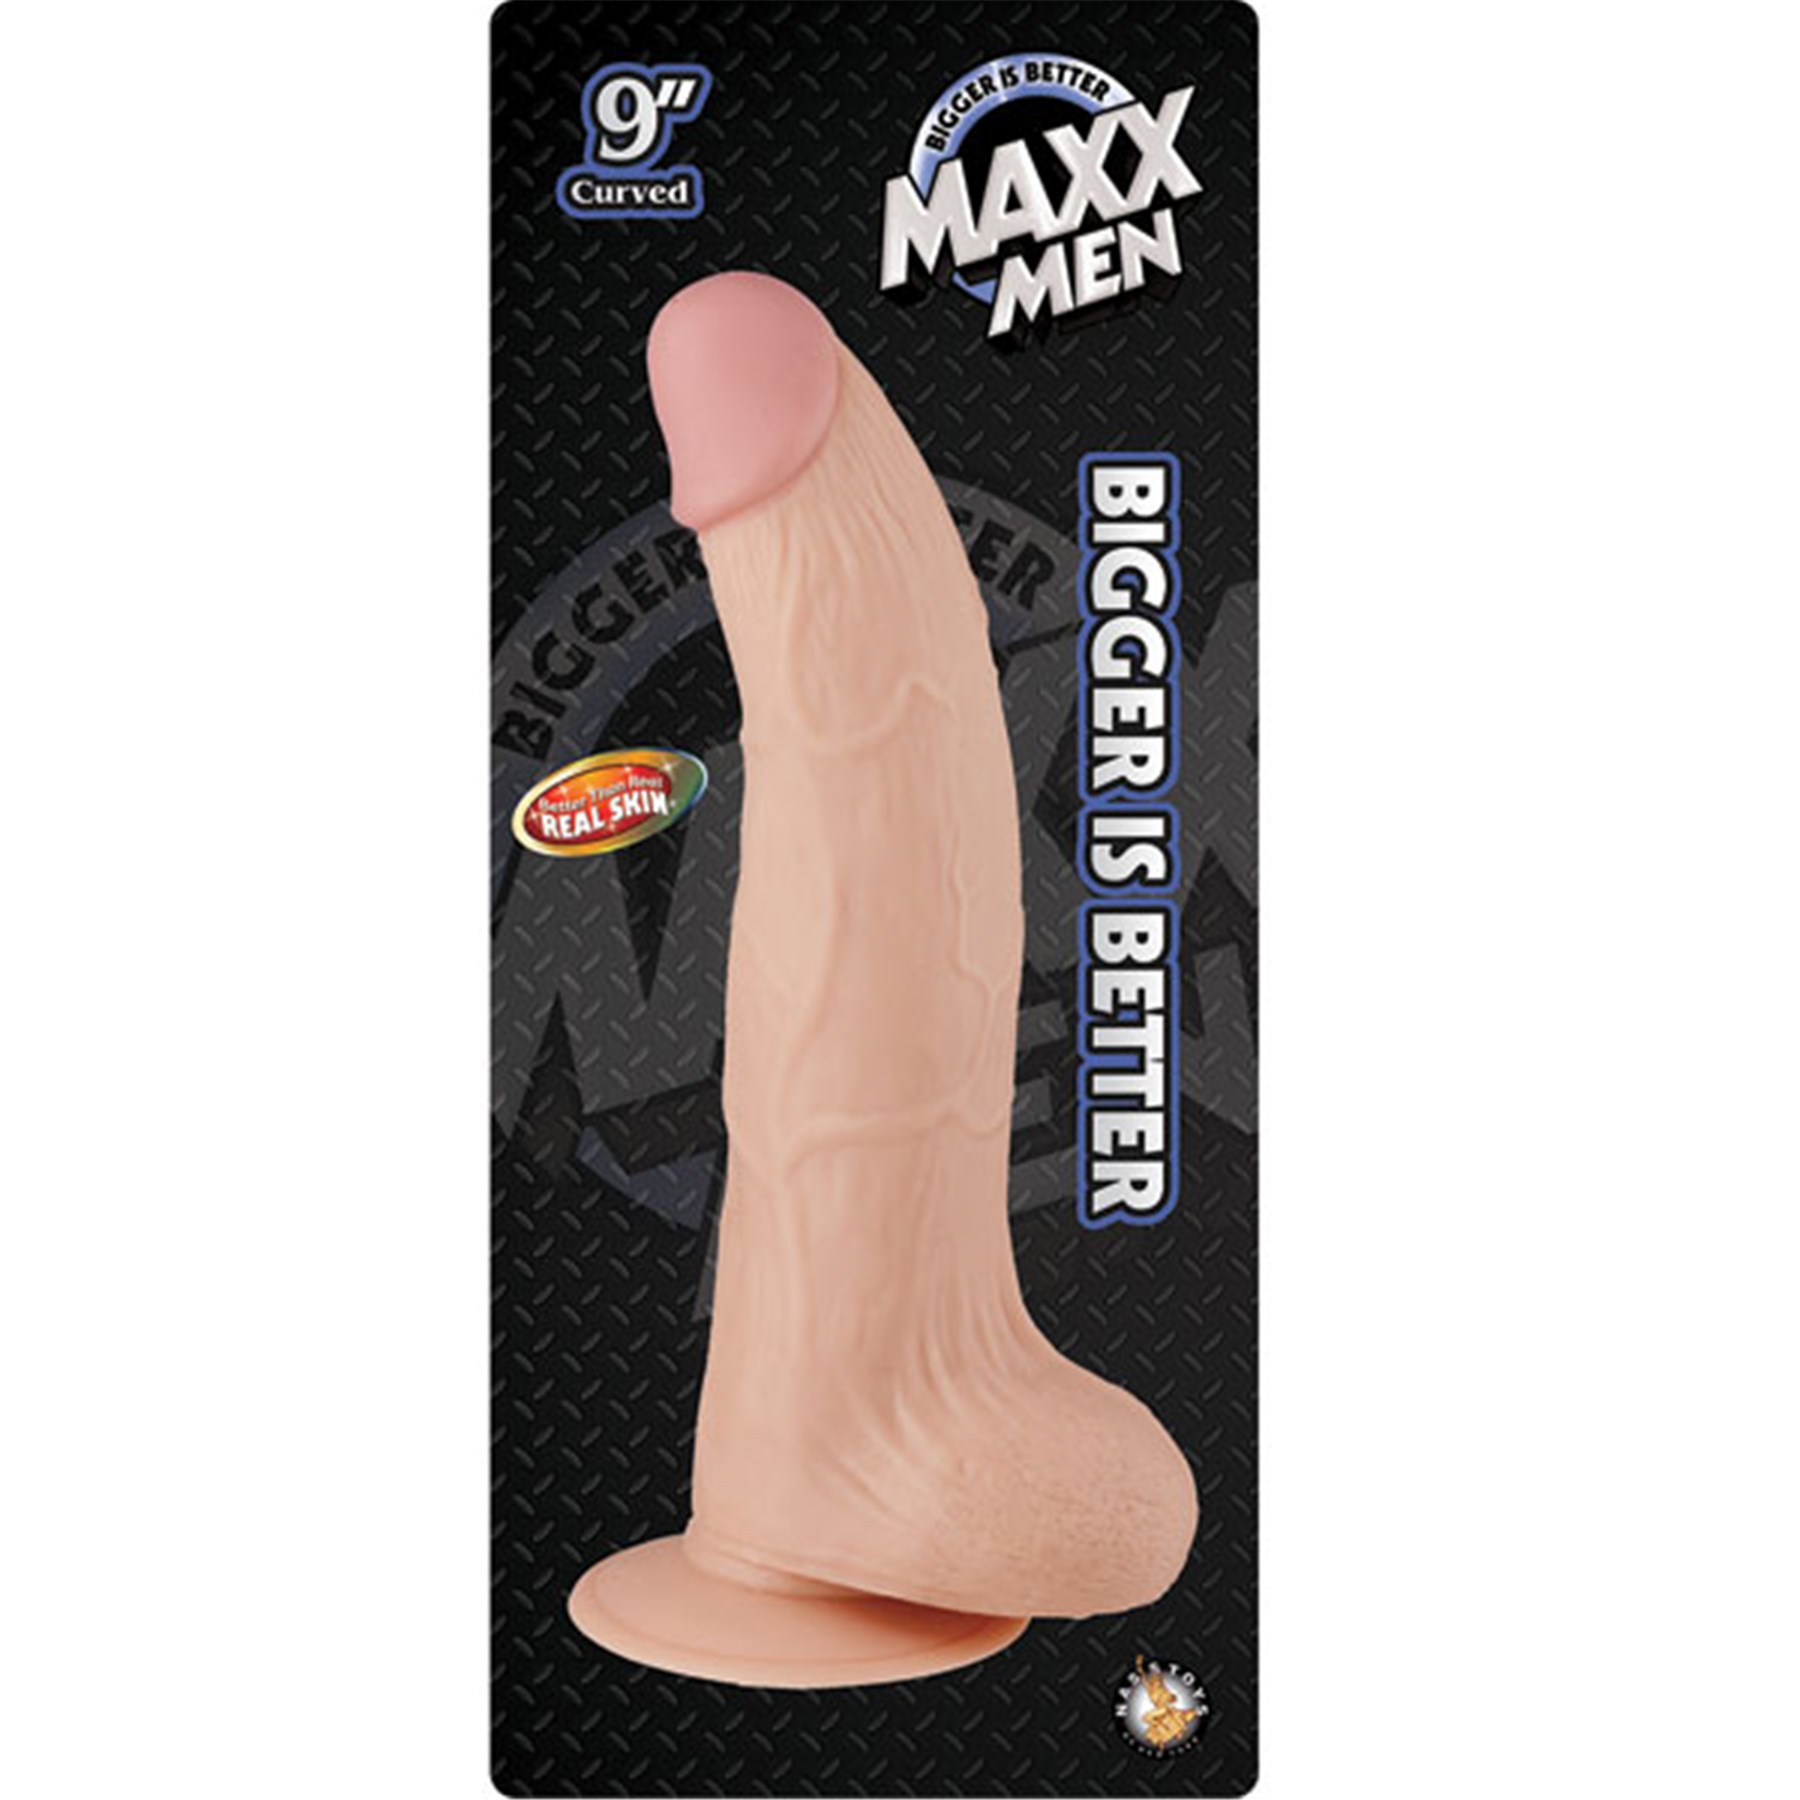 Maxx Men 9 Curved Dong